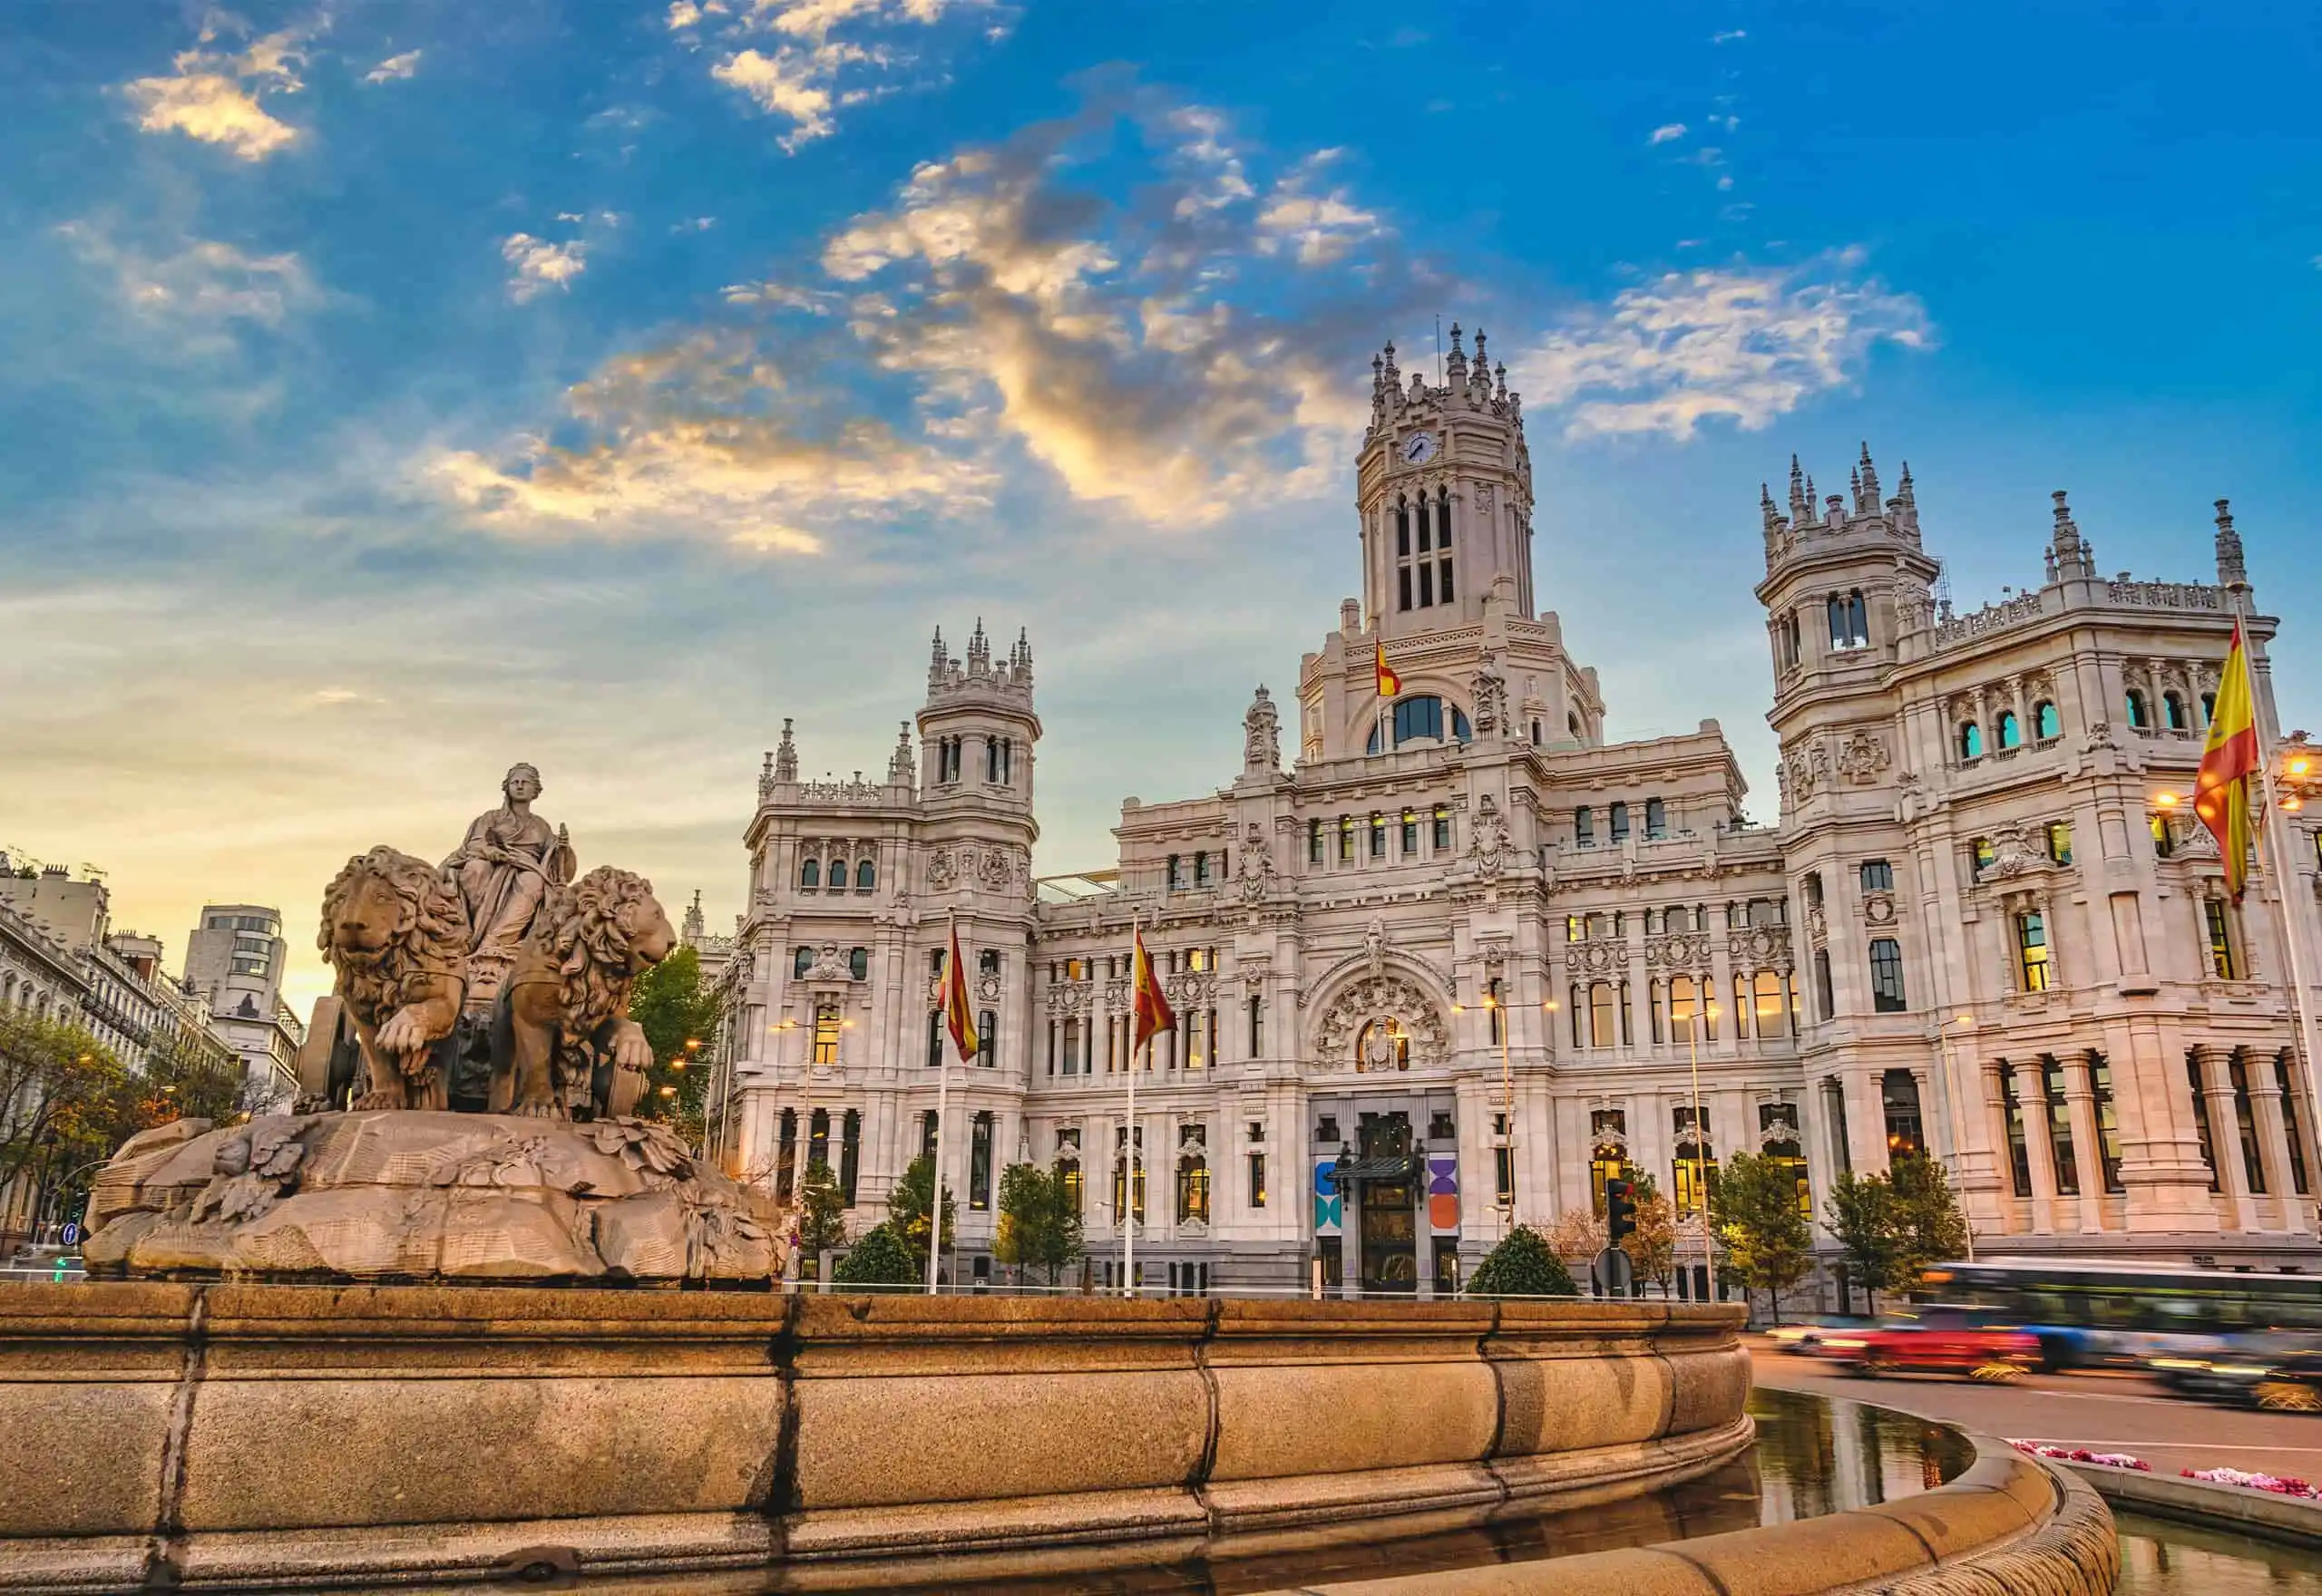 Human Resource Management Courses in Madrid